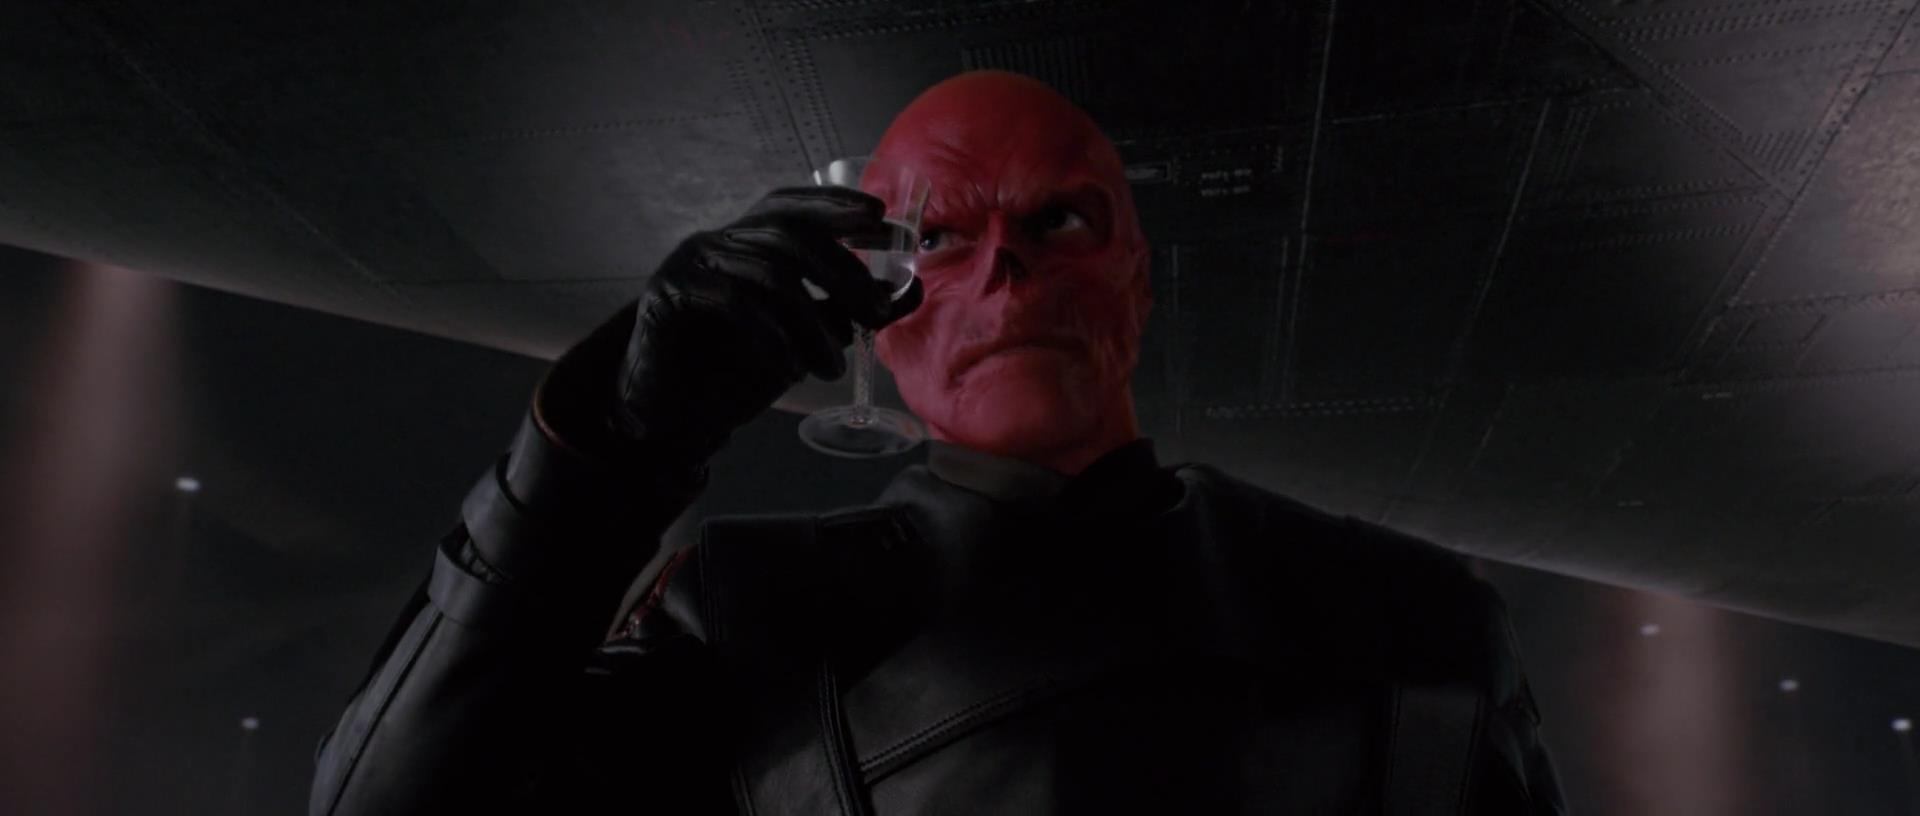 Red Skull/Quote Marvel Cinematic Universe Wiki FANDOM powered by Wikia